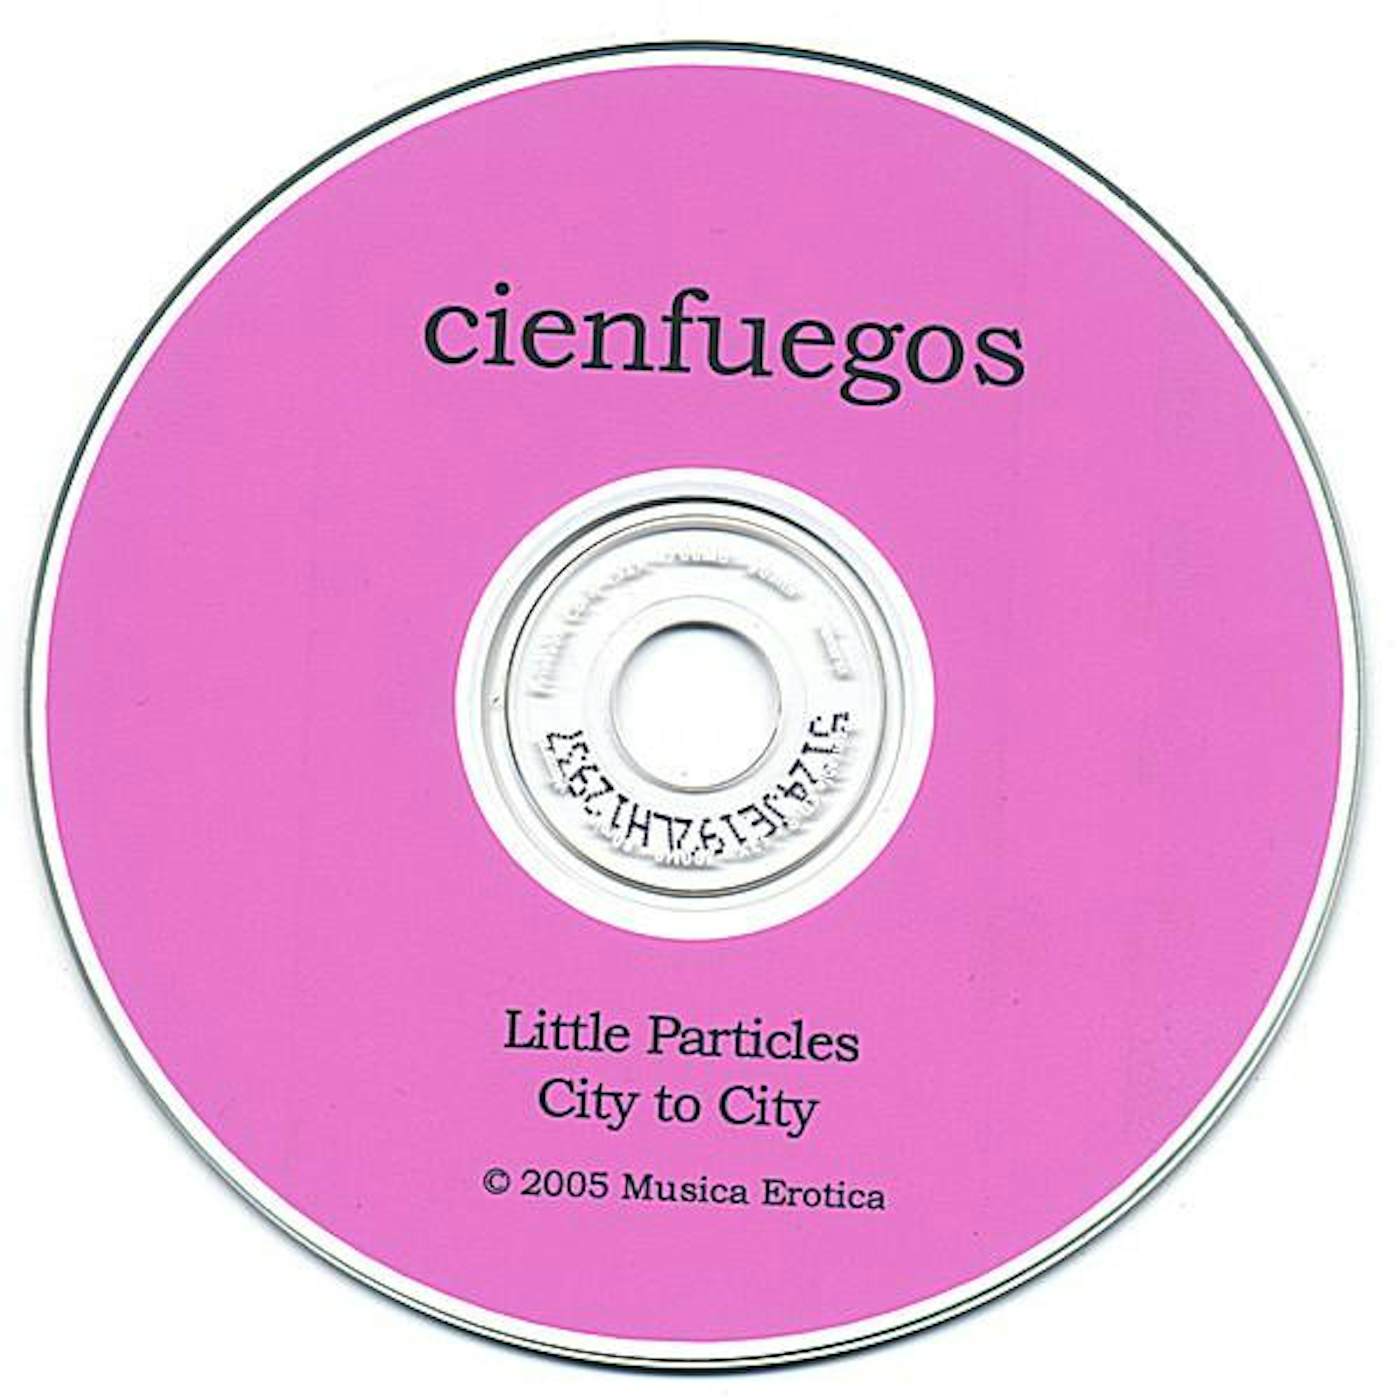 Cienfuegos LITTLE PARTICLES CD